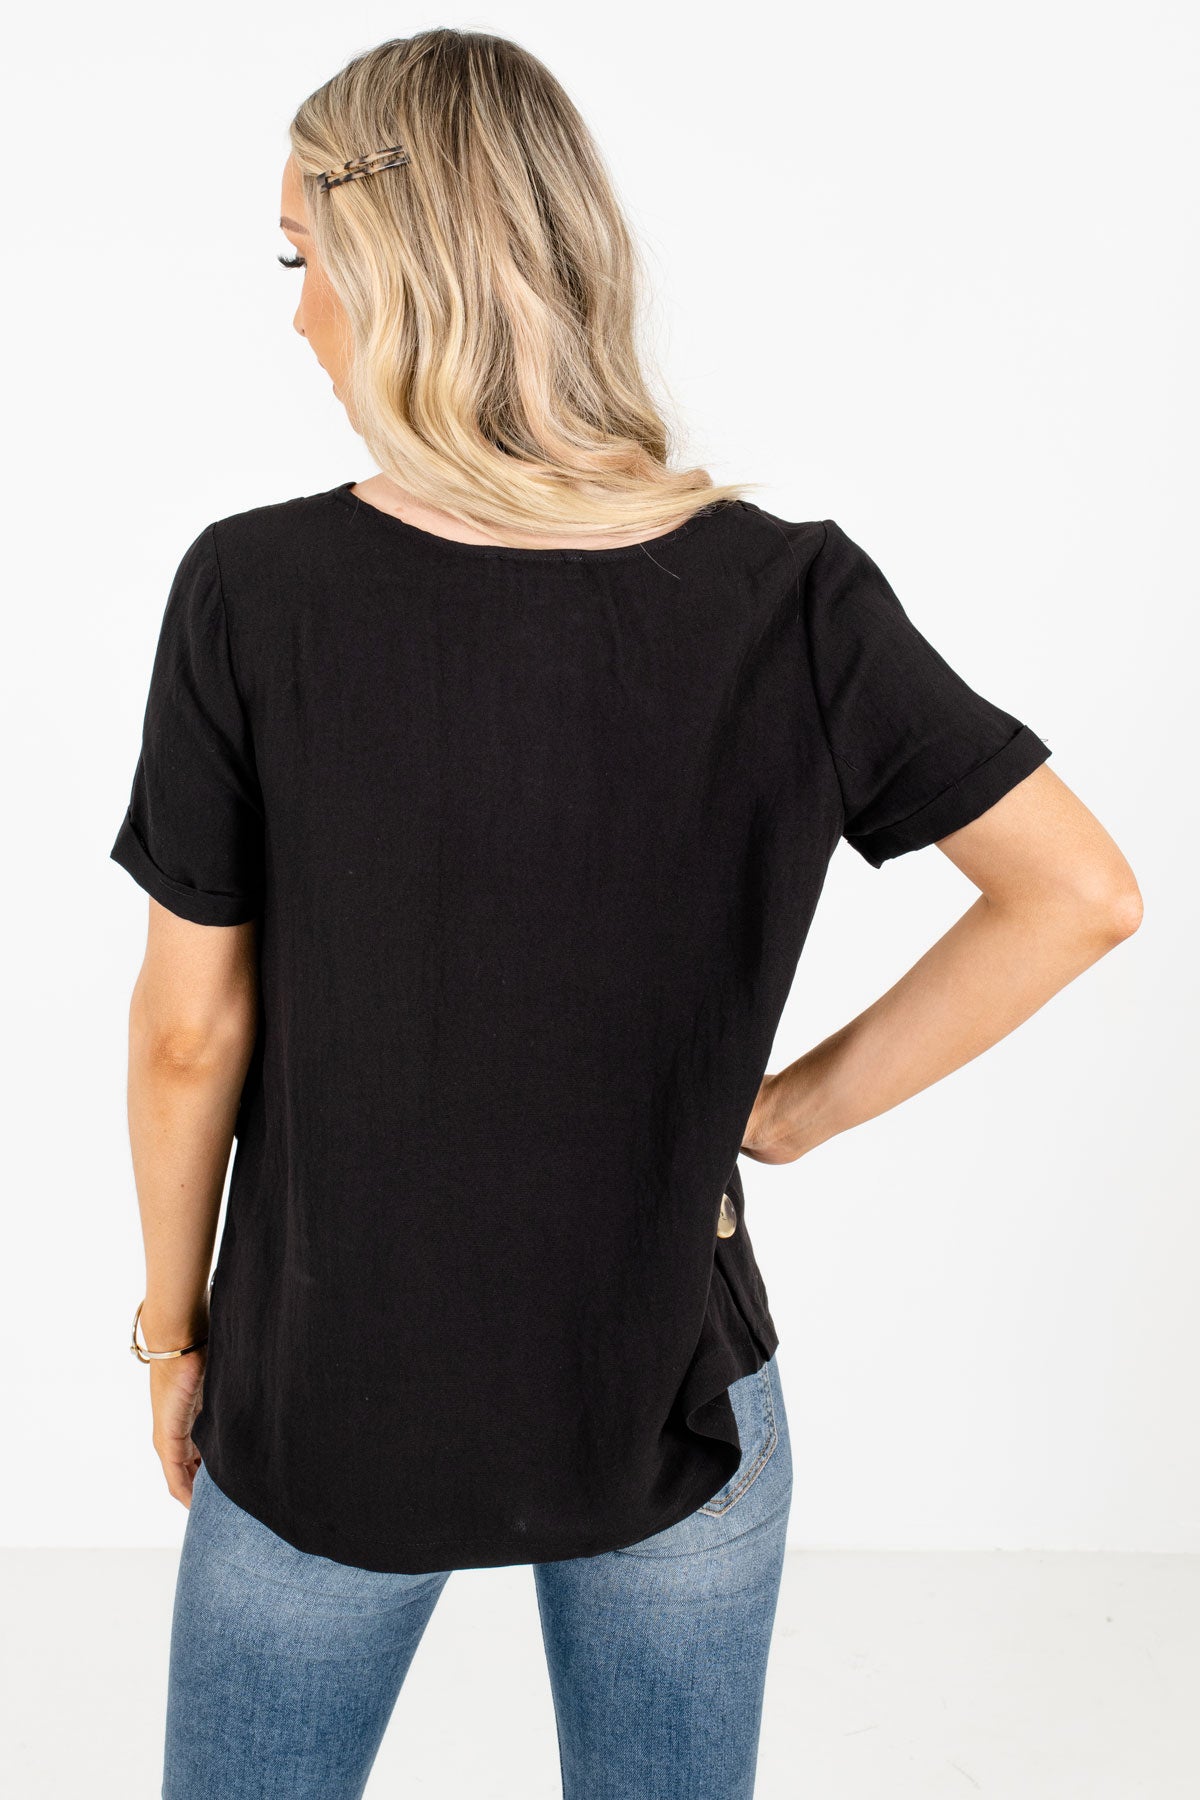 Black Front Pleated Accent Boutique Tops for Women